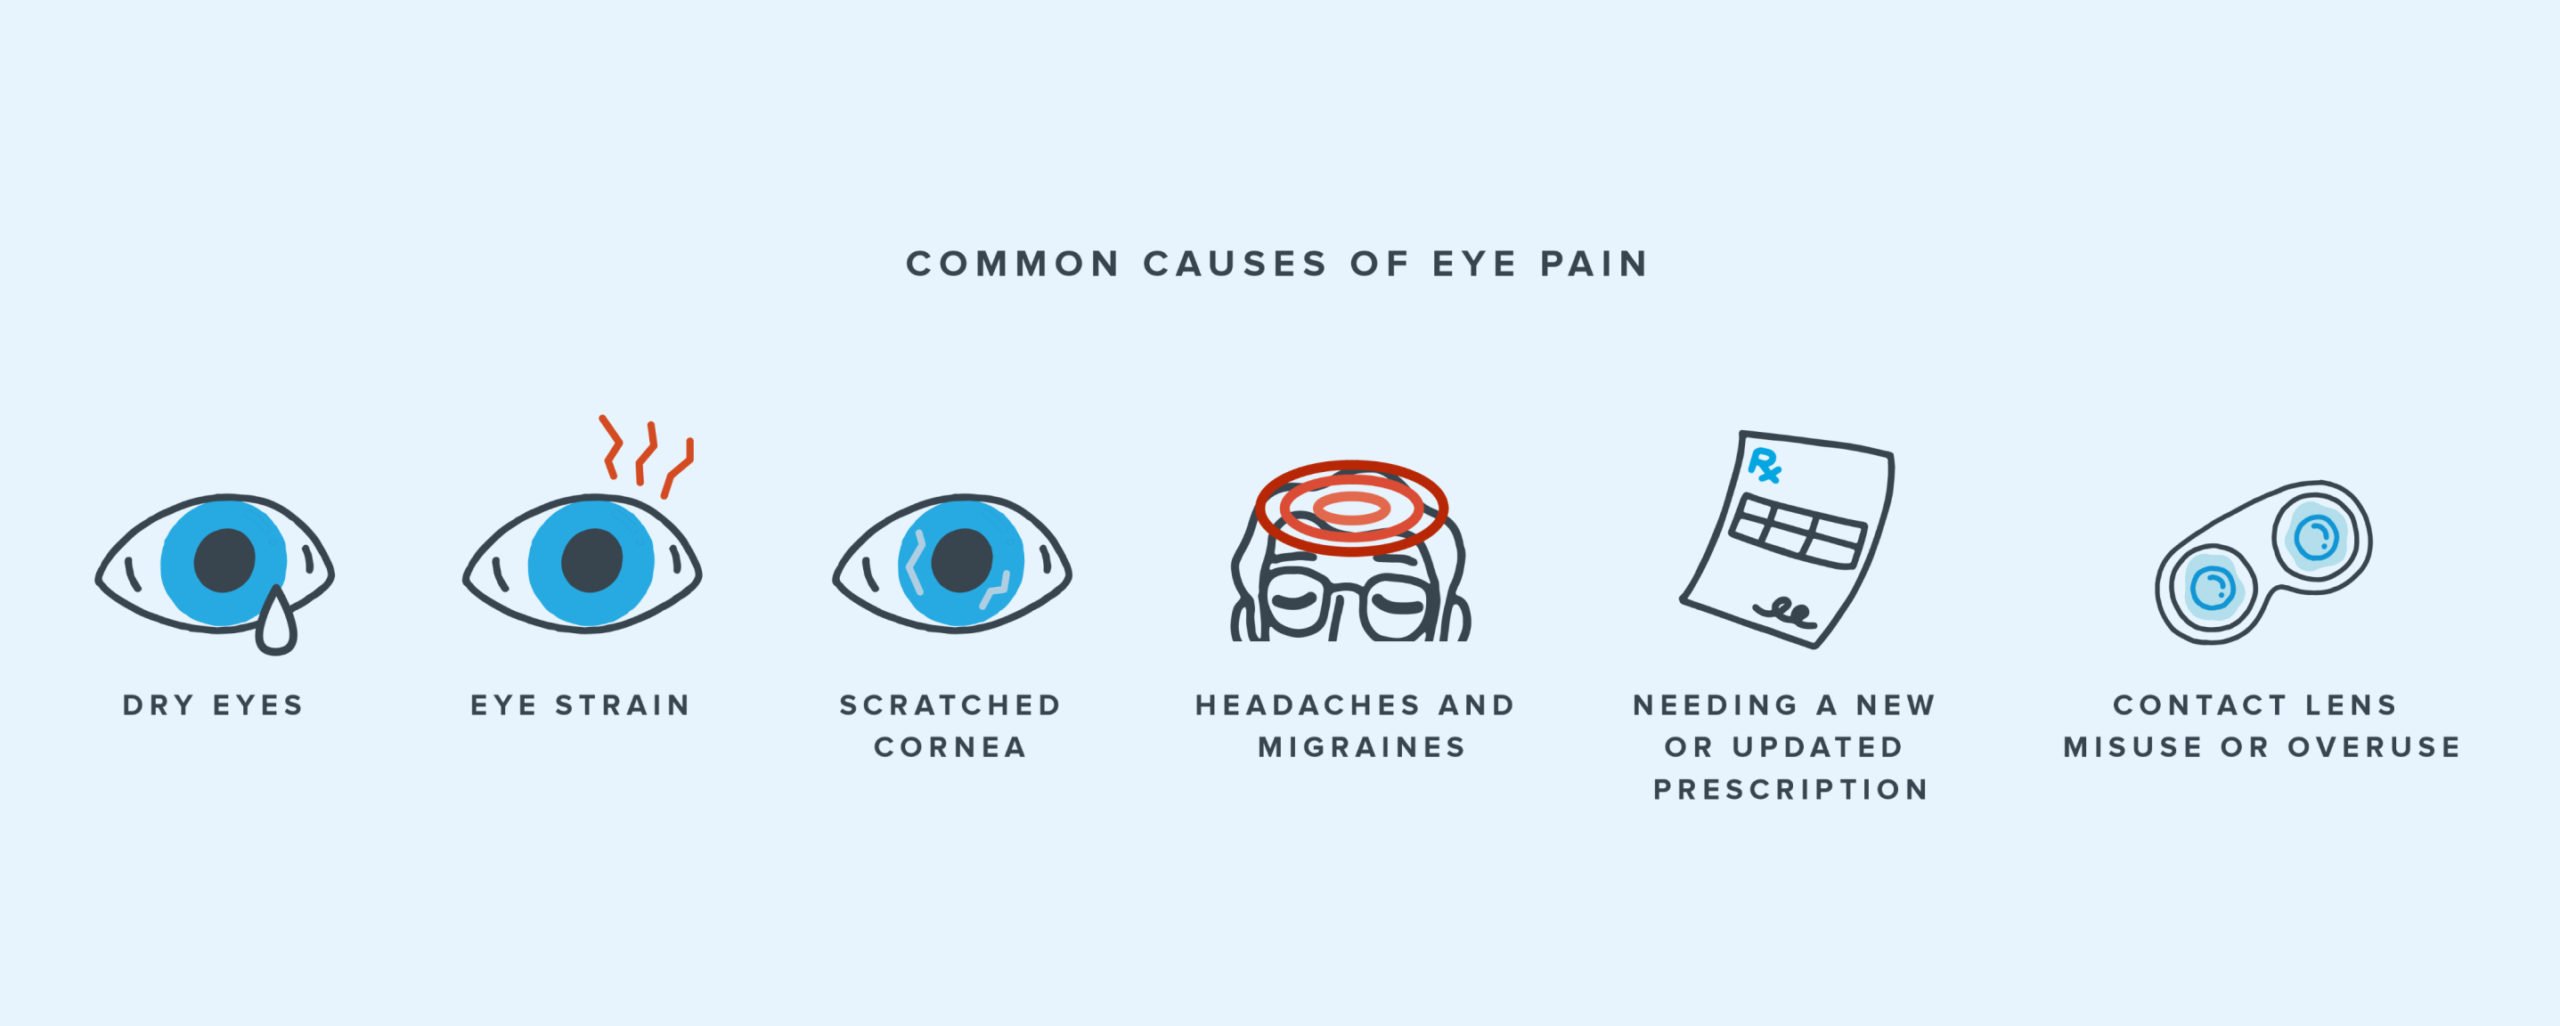 Infographic showing common causes of eye pain